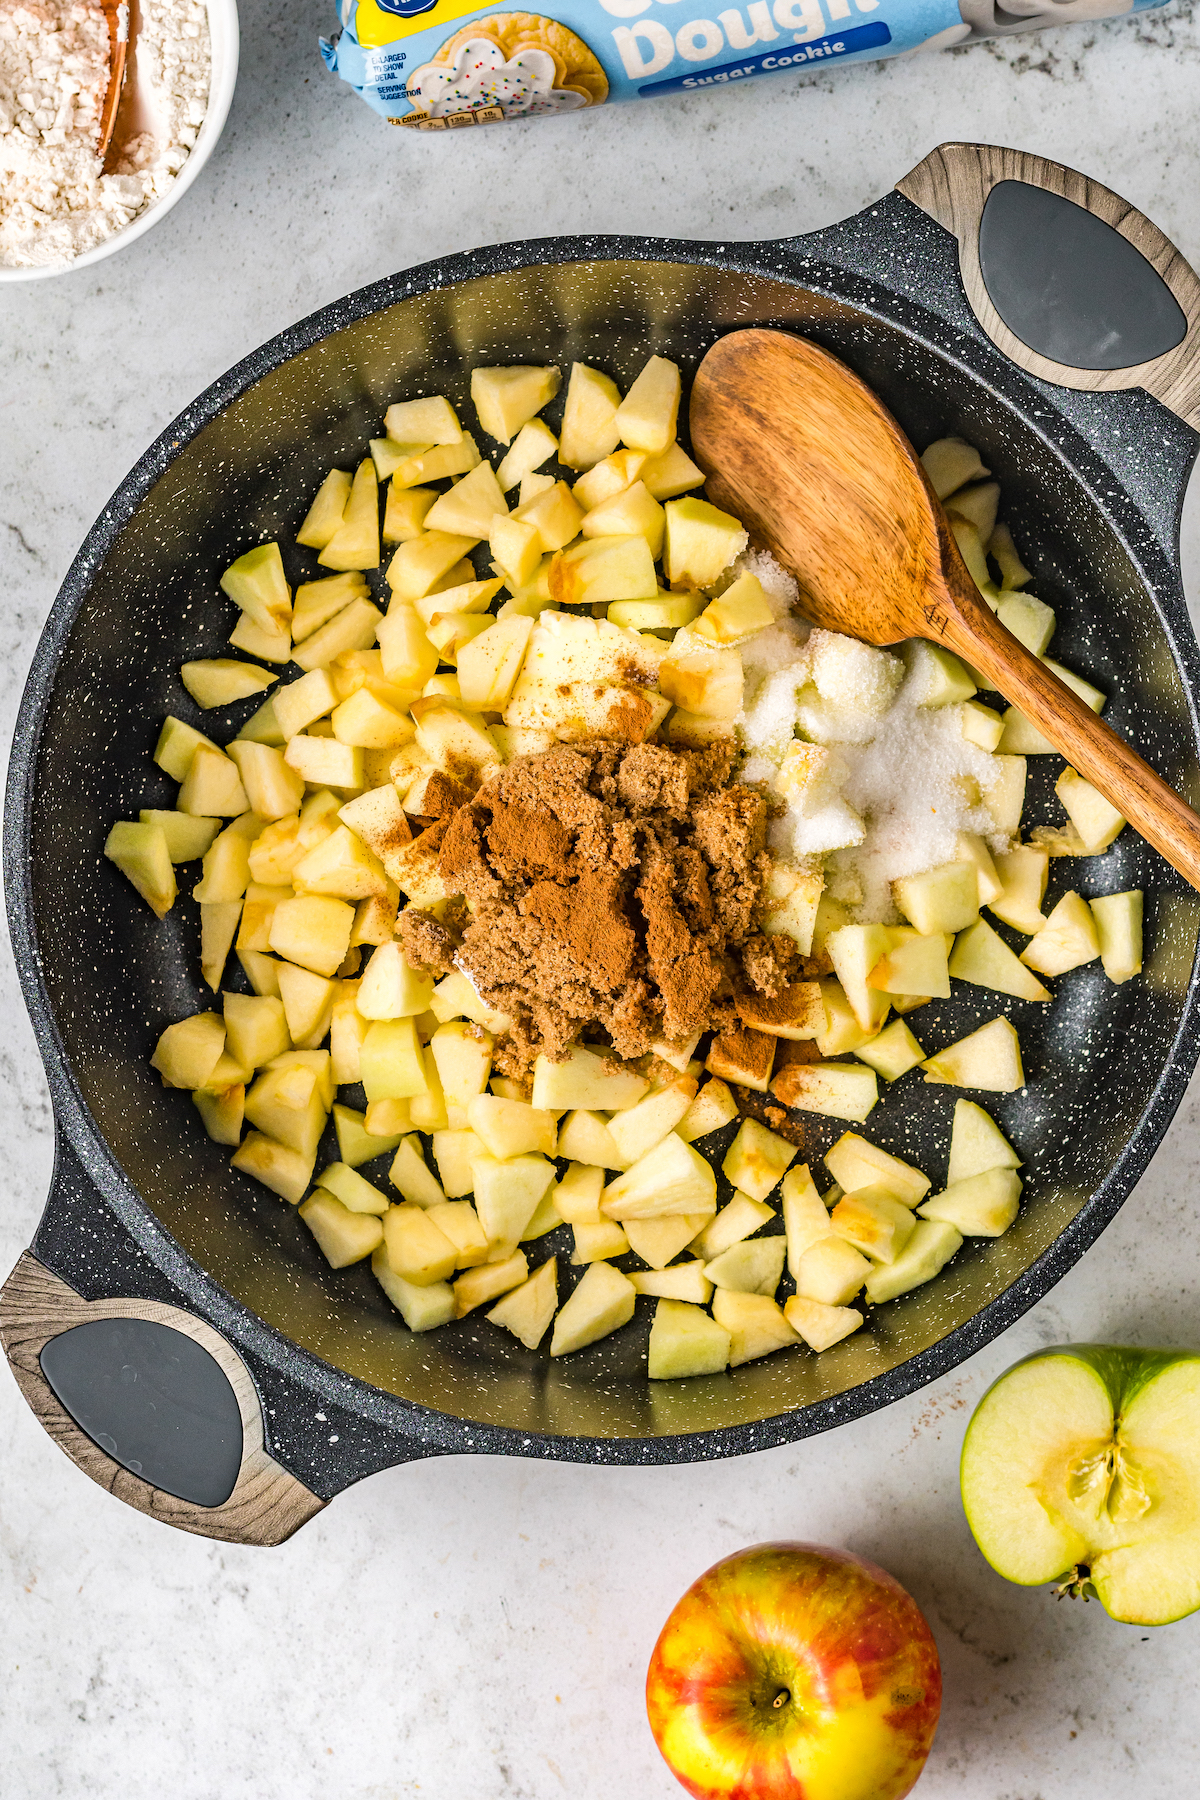 Apples, spices, flour, and other ingredients cooking in a saucepan.